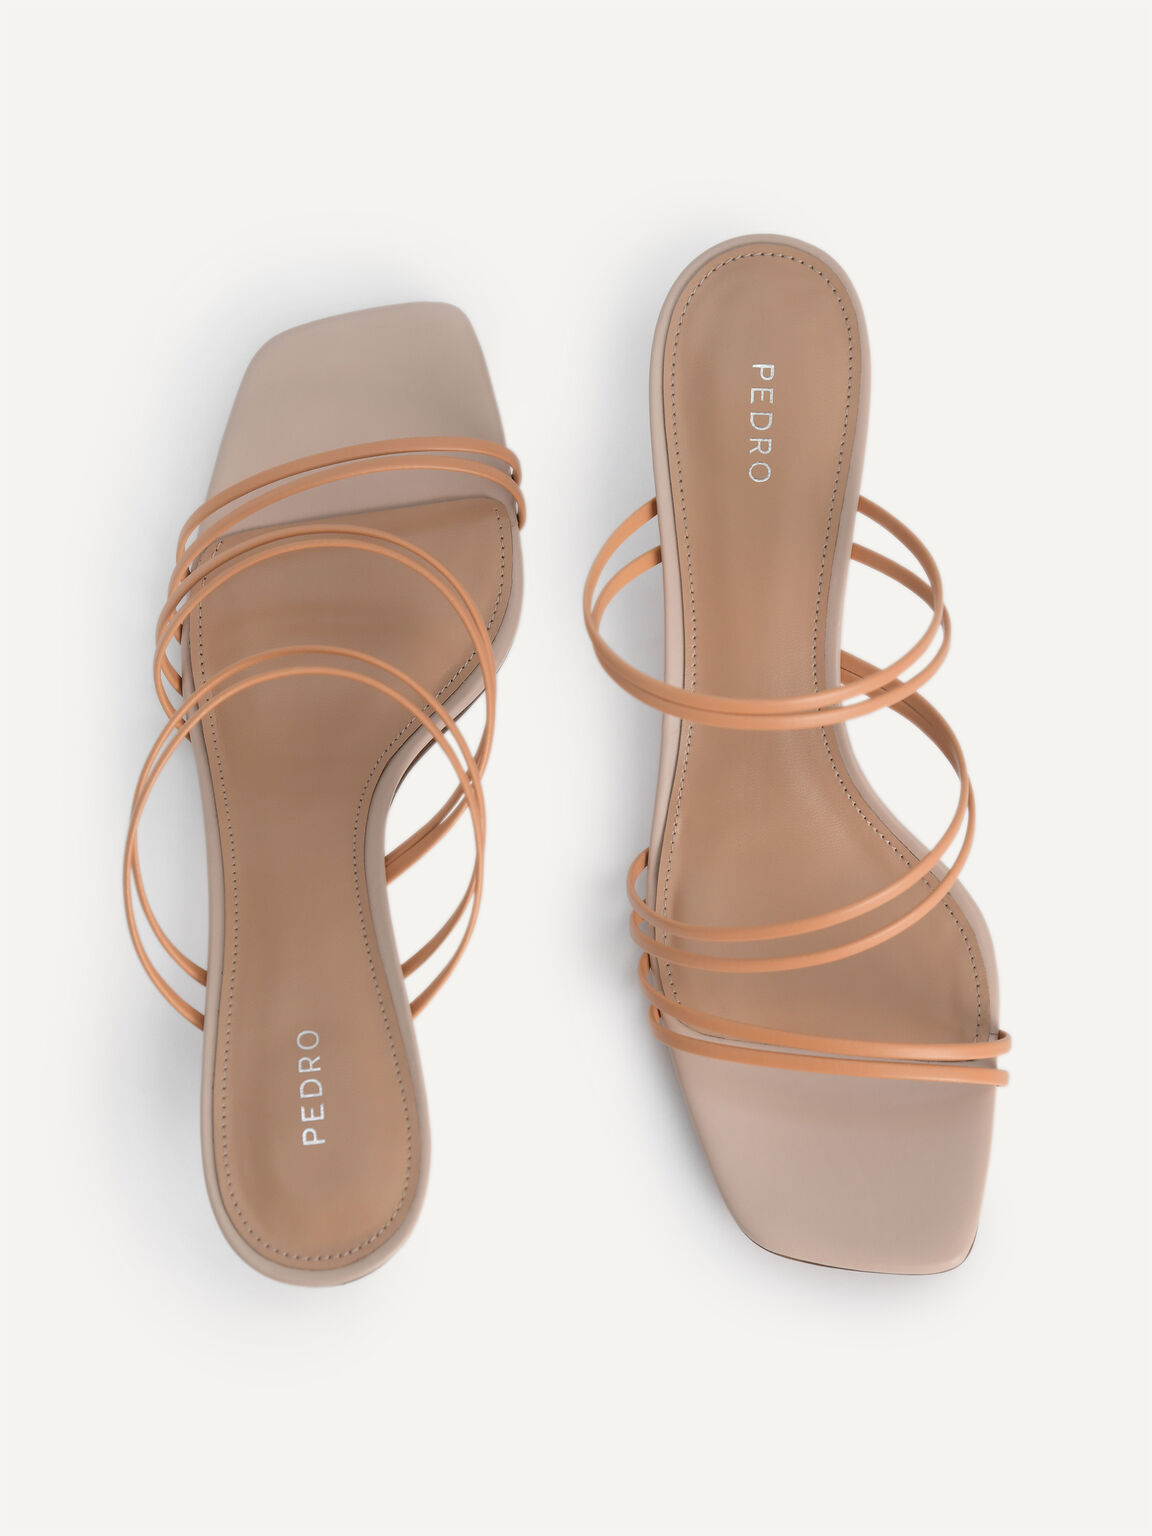 Strappy Heeled Sandals, Camel